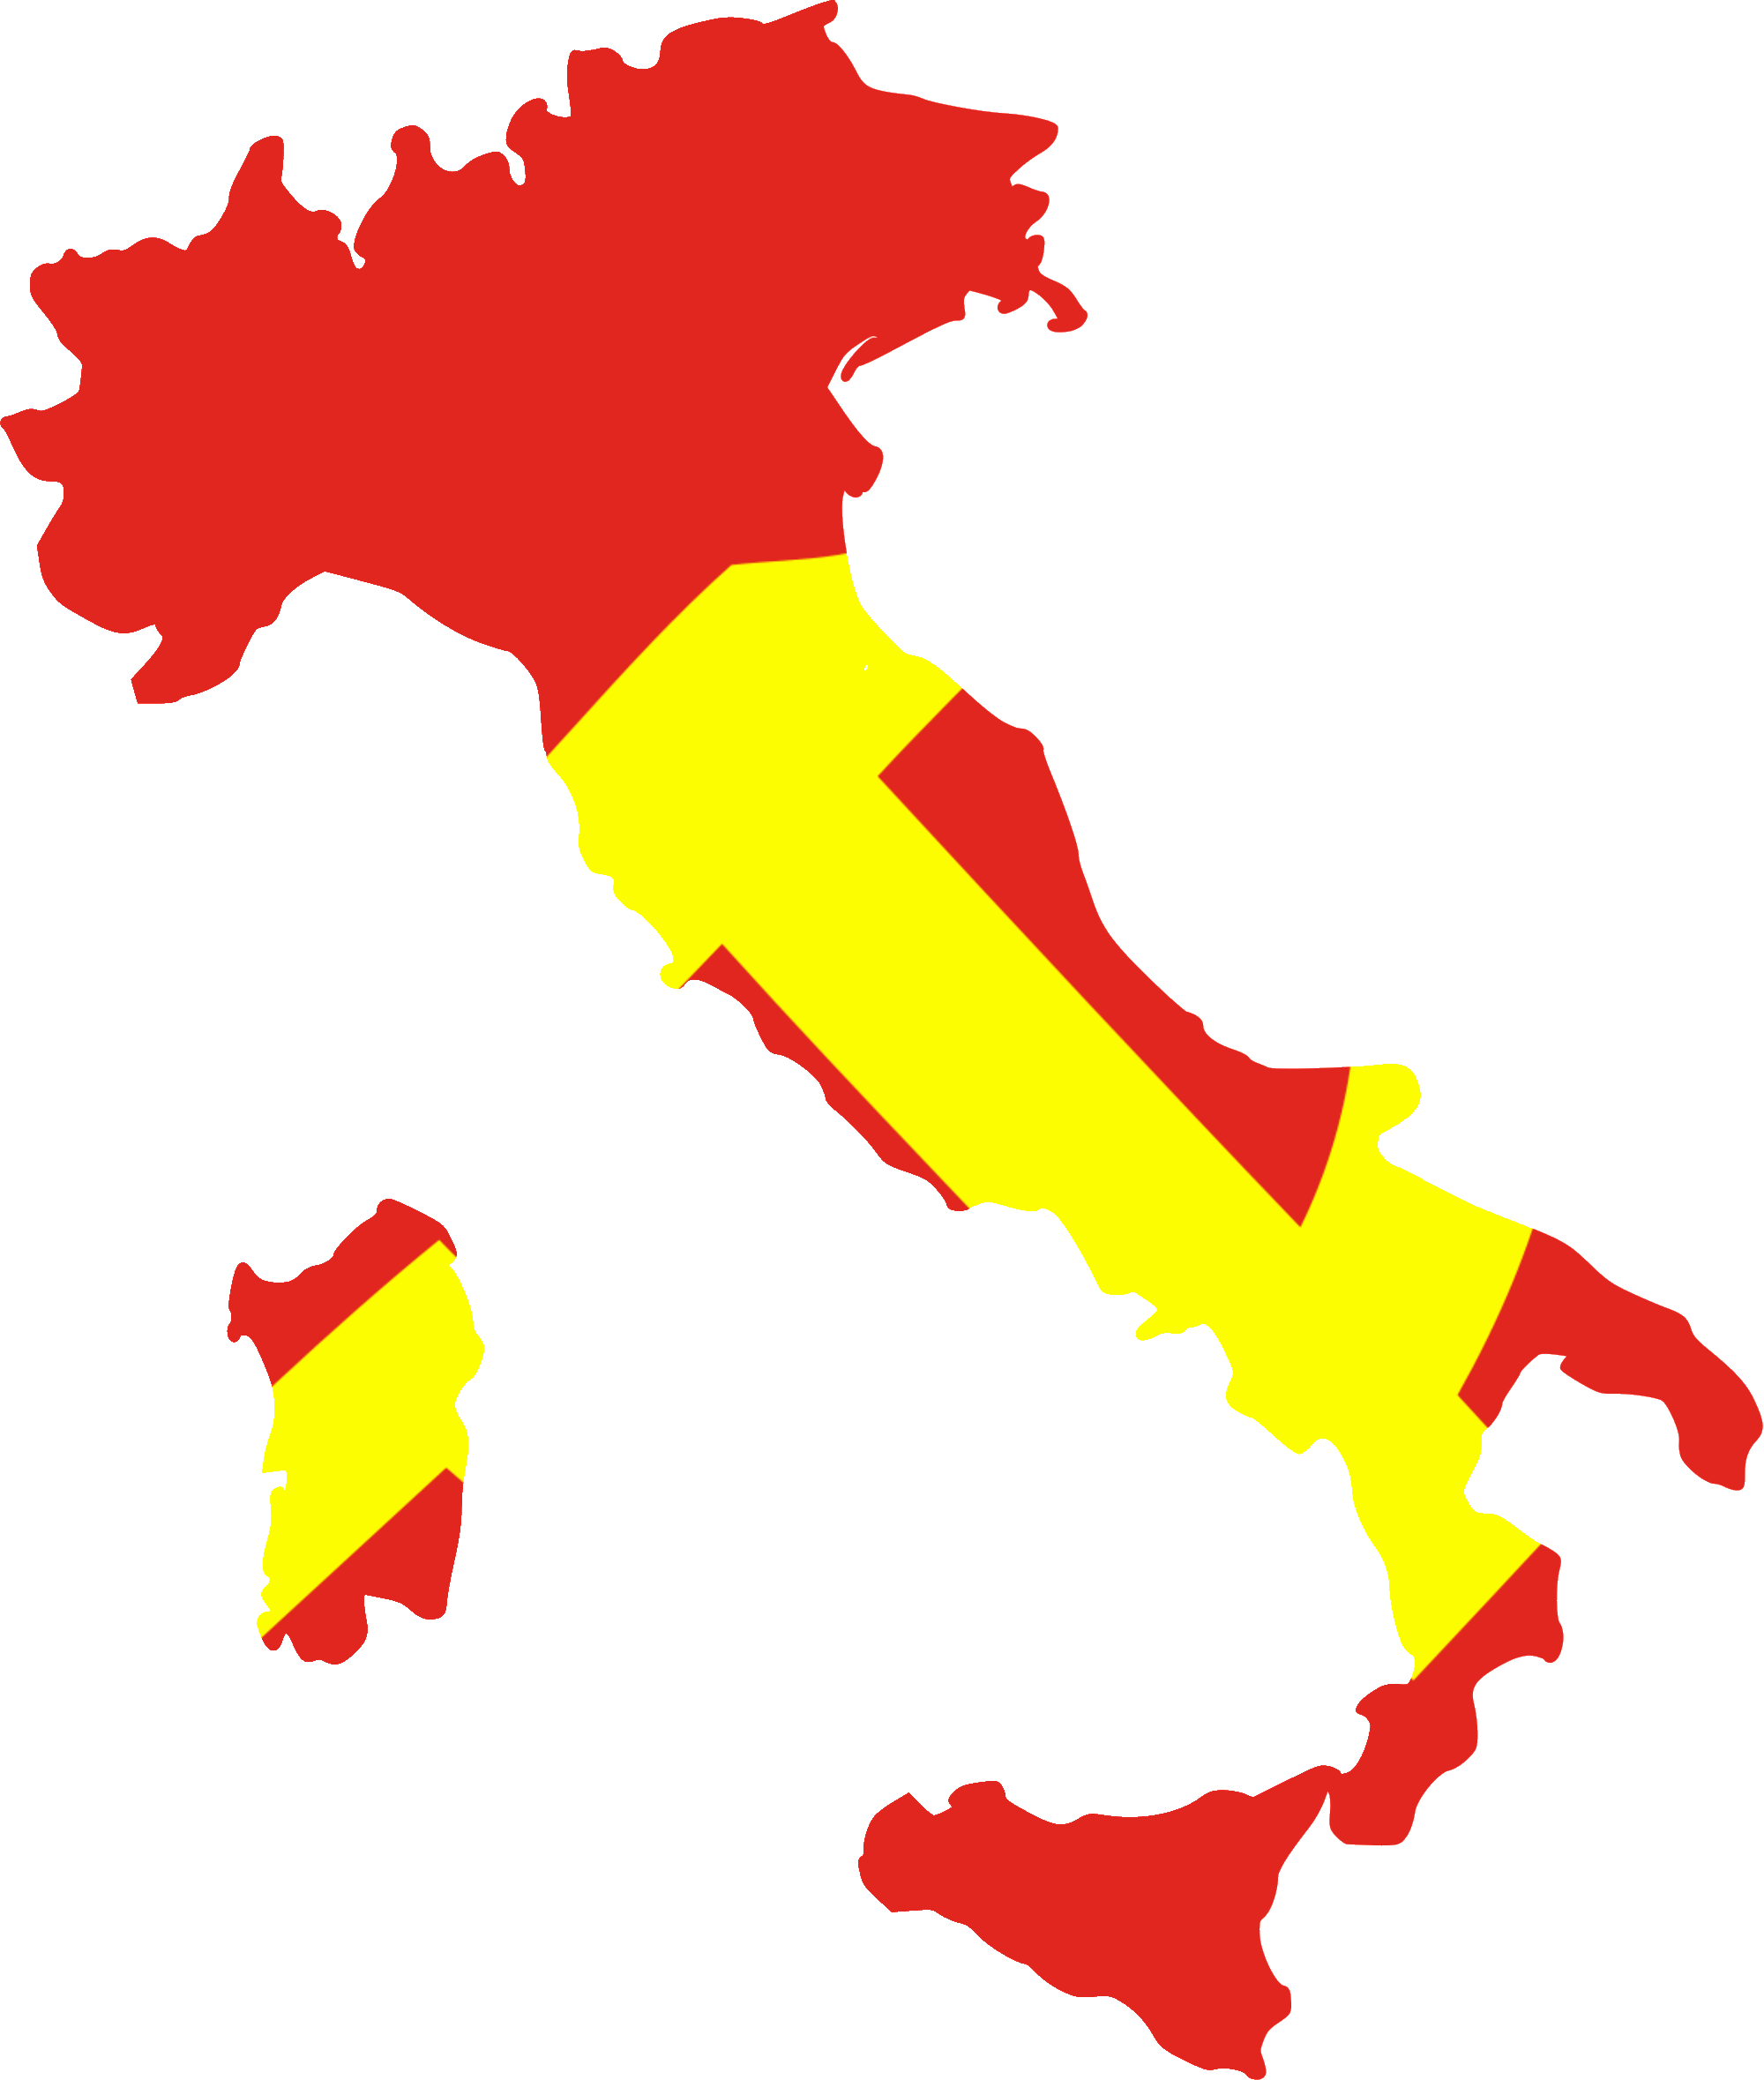 File:Flag map of Italy (Italian Communist Party).png - Wikimedia ...